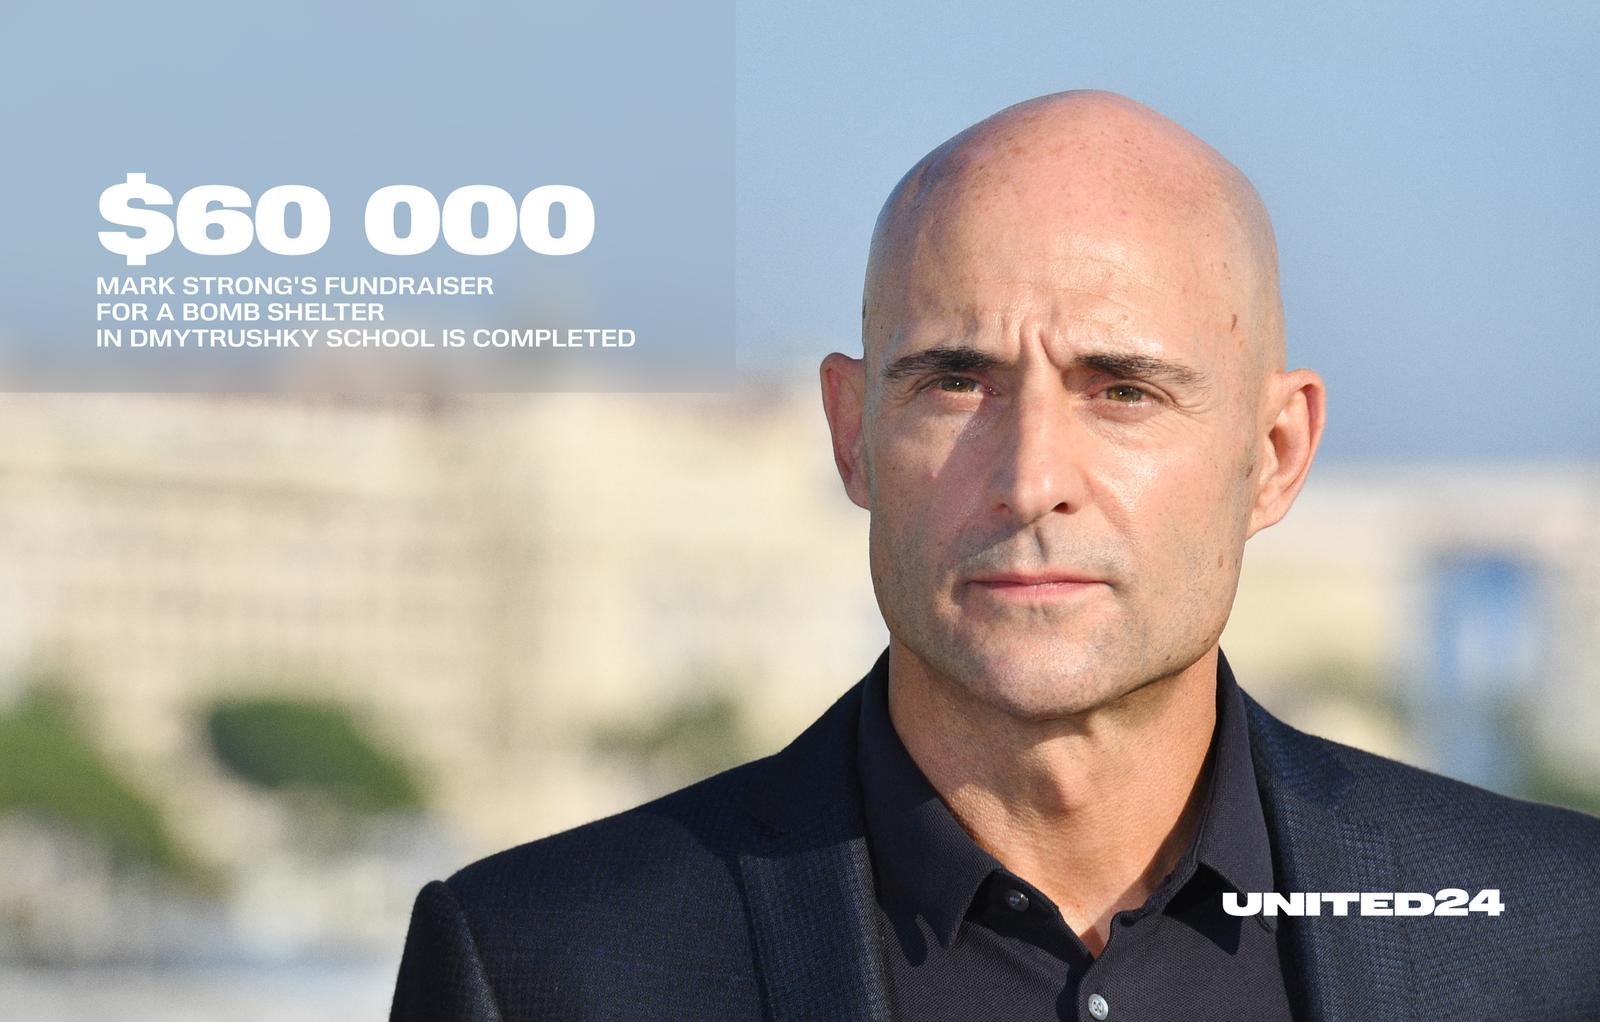 Mark Strong’s fundraiser is closed!